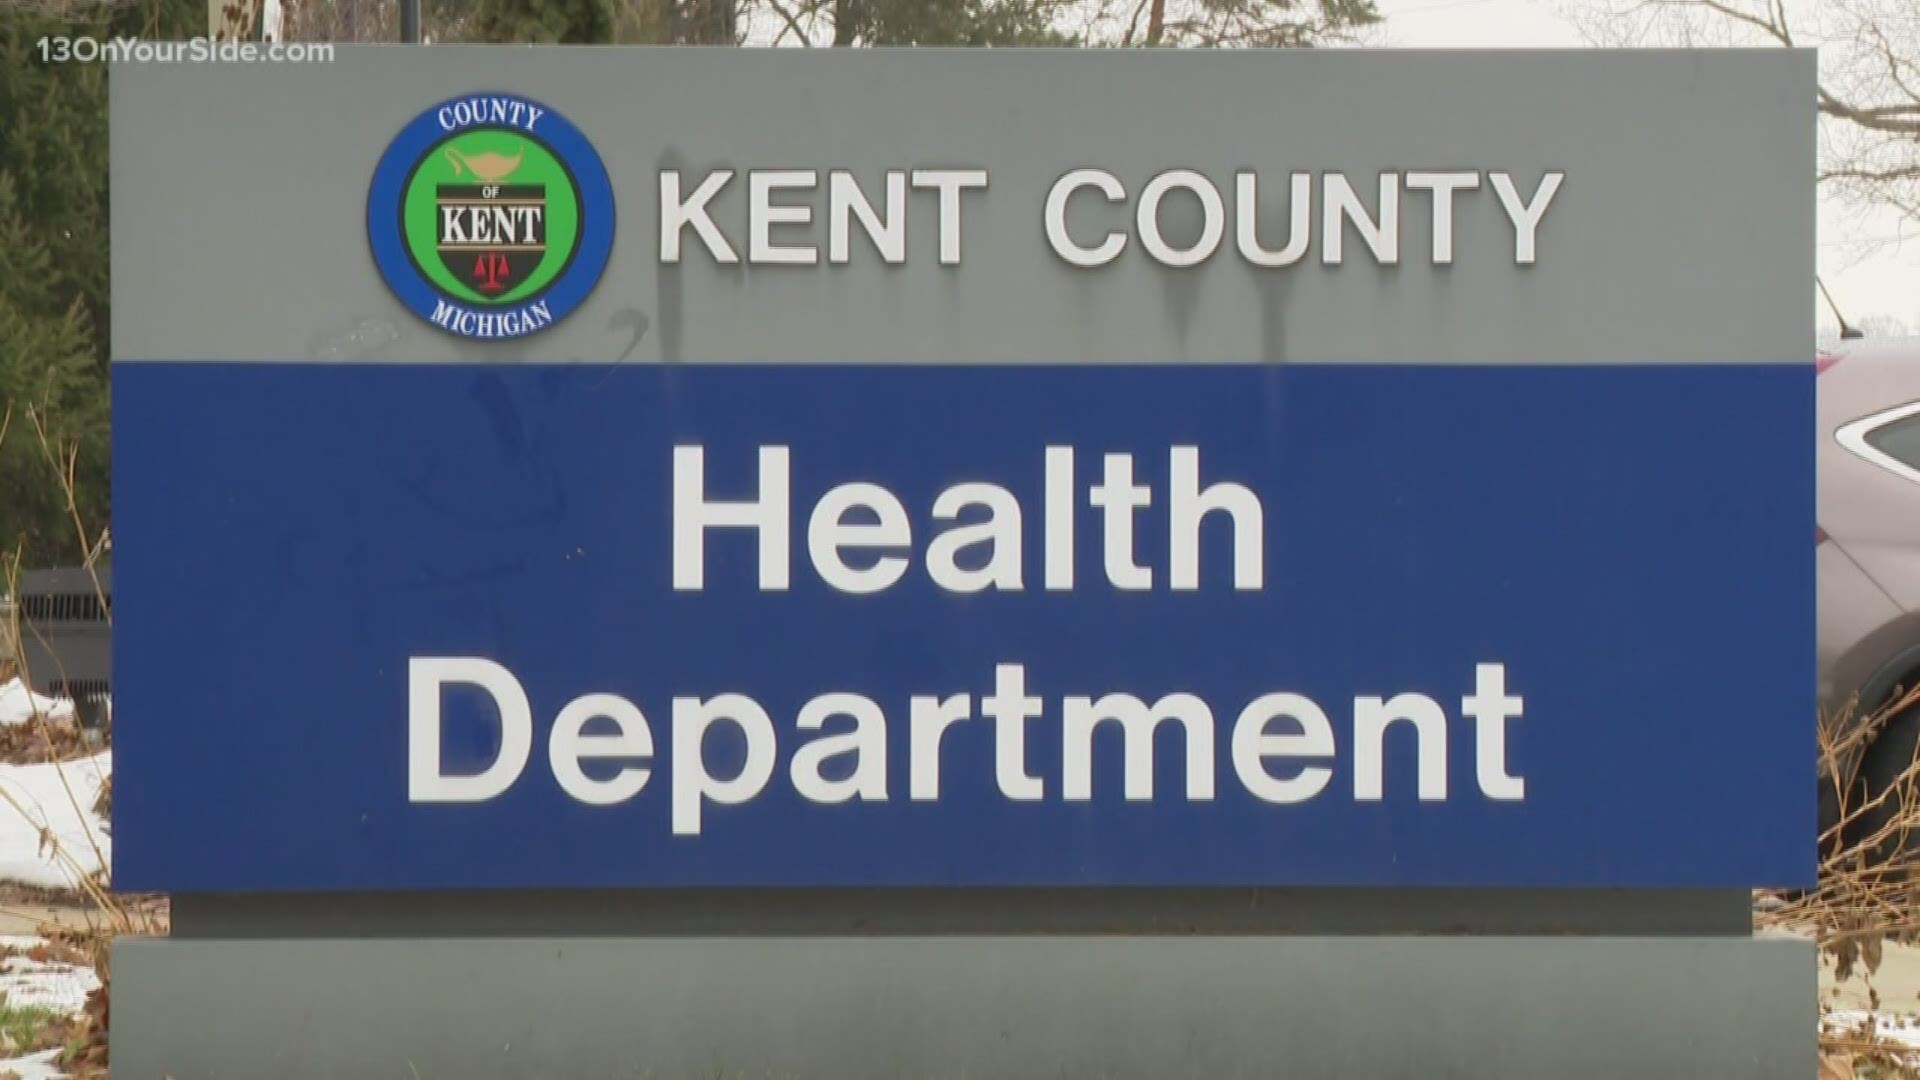 State health officials said there are 10 more presumptive positive cases of COVID-19 in the state, including three in Kent County.